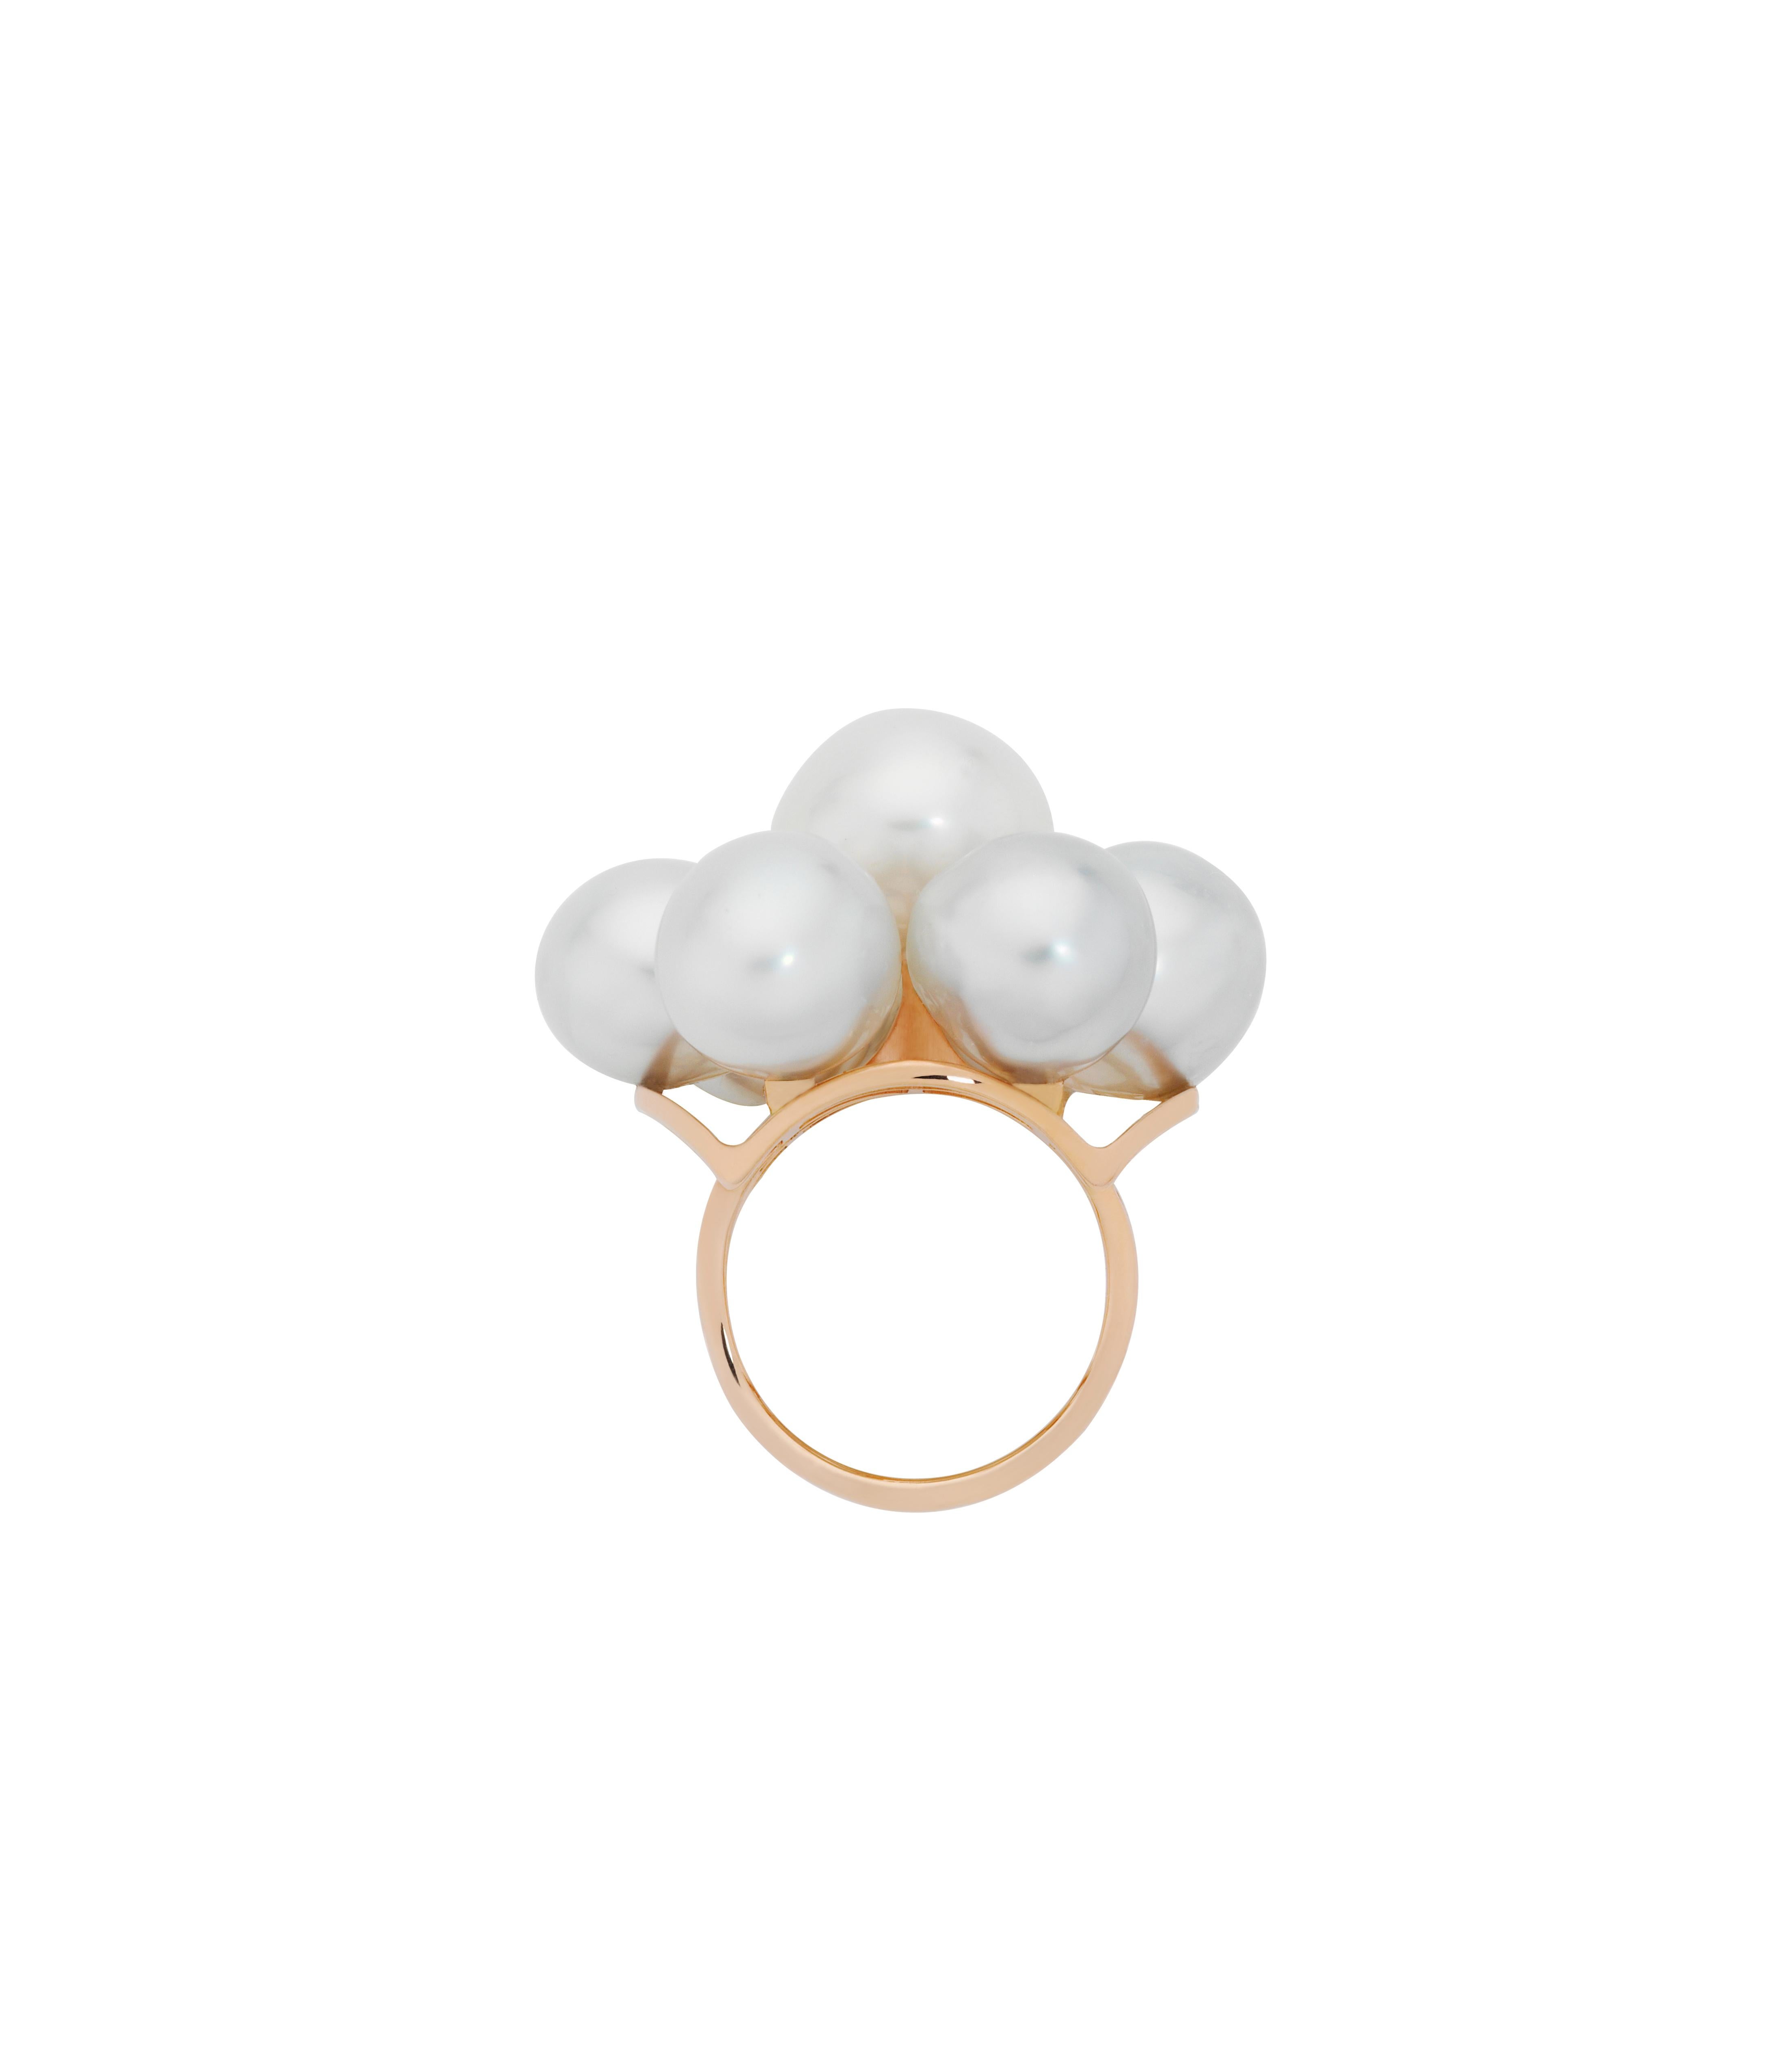 Giulians 7 Baroque South Sea Pearl Cocktail Ring in 18 karat Rose Gold.  This glamorous dress ring features a cluster of Australian South Sea Baroque pearls, sitting atop an 18 karat rose gold star-shaped gallery.  The outer six pearls are 11 -